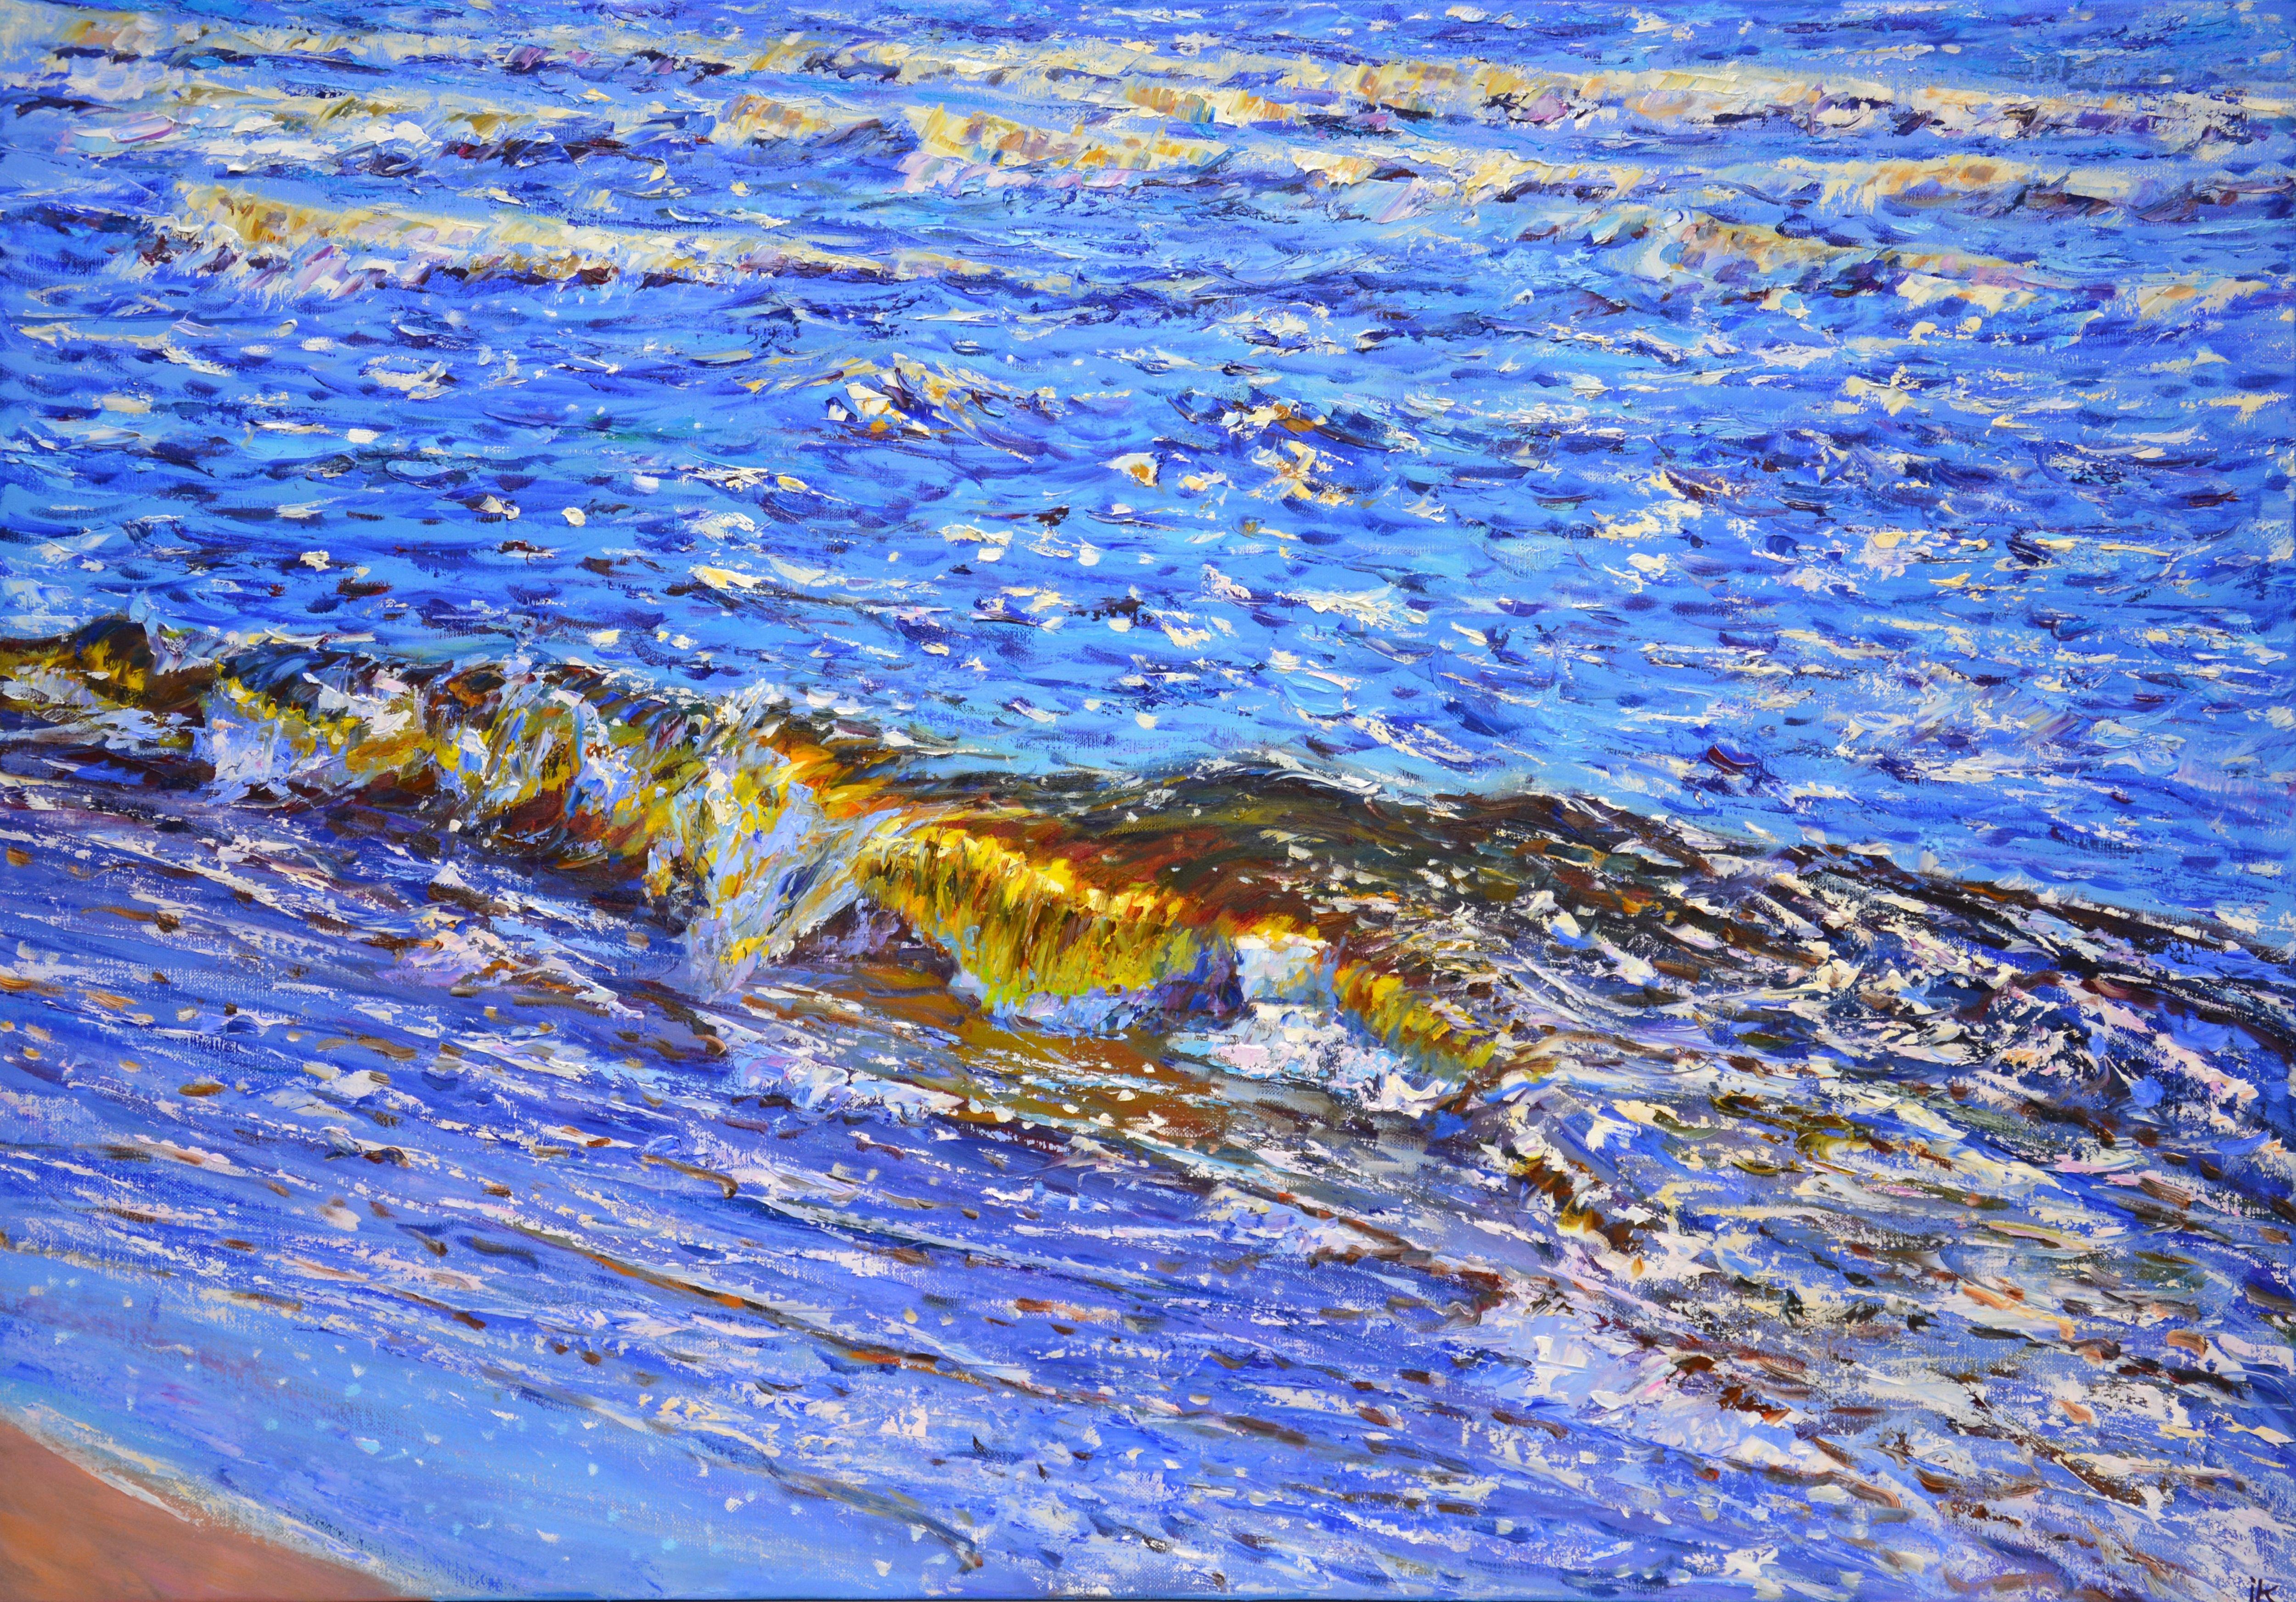 Bright daylight reflects off the rolling waves, creating an almost abstract composition in blue. A rigid palette of knives and a rich palette of blue, green, yellow and rust capture the movement of water and the warm radiance of the sun.  The